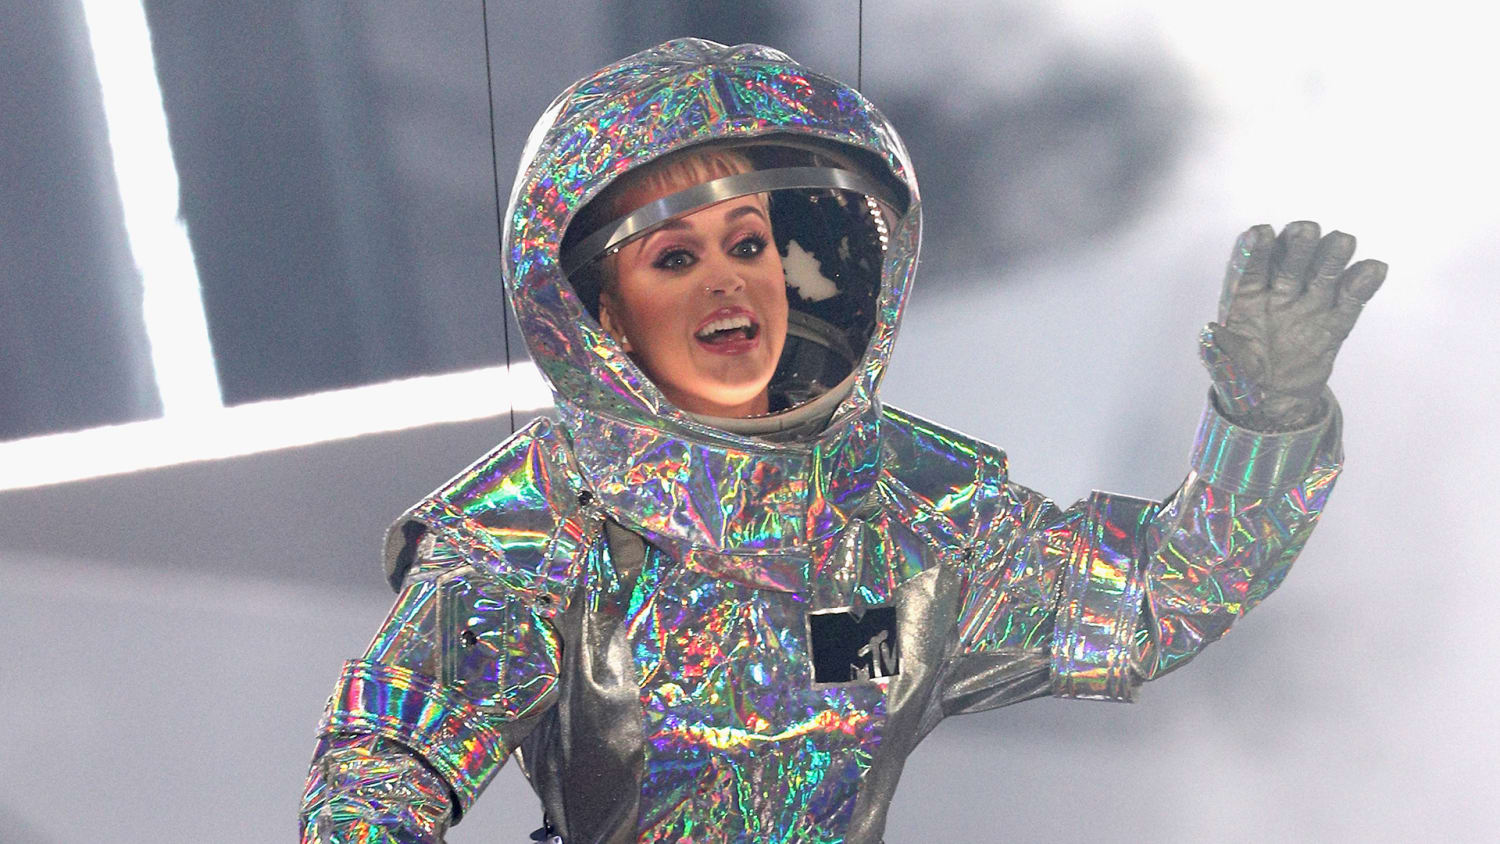 See Katy Perry's most buzzworthy VMAs moments and costumes